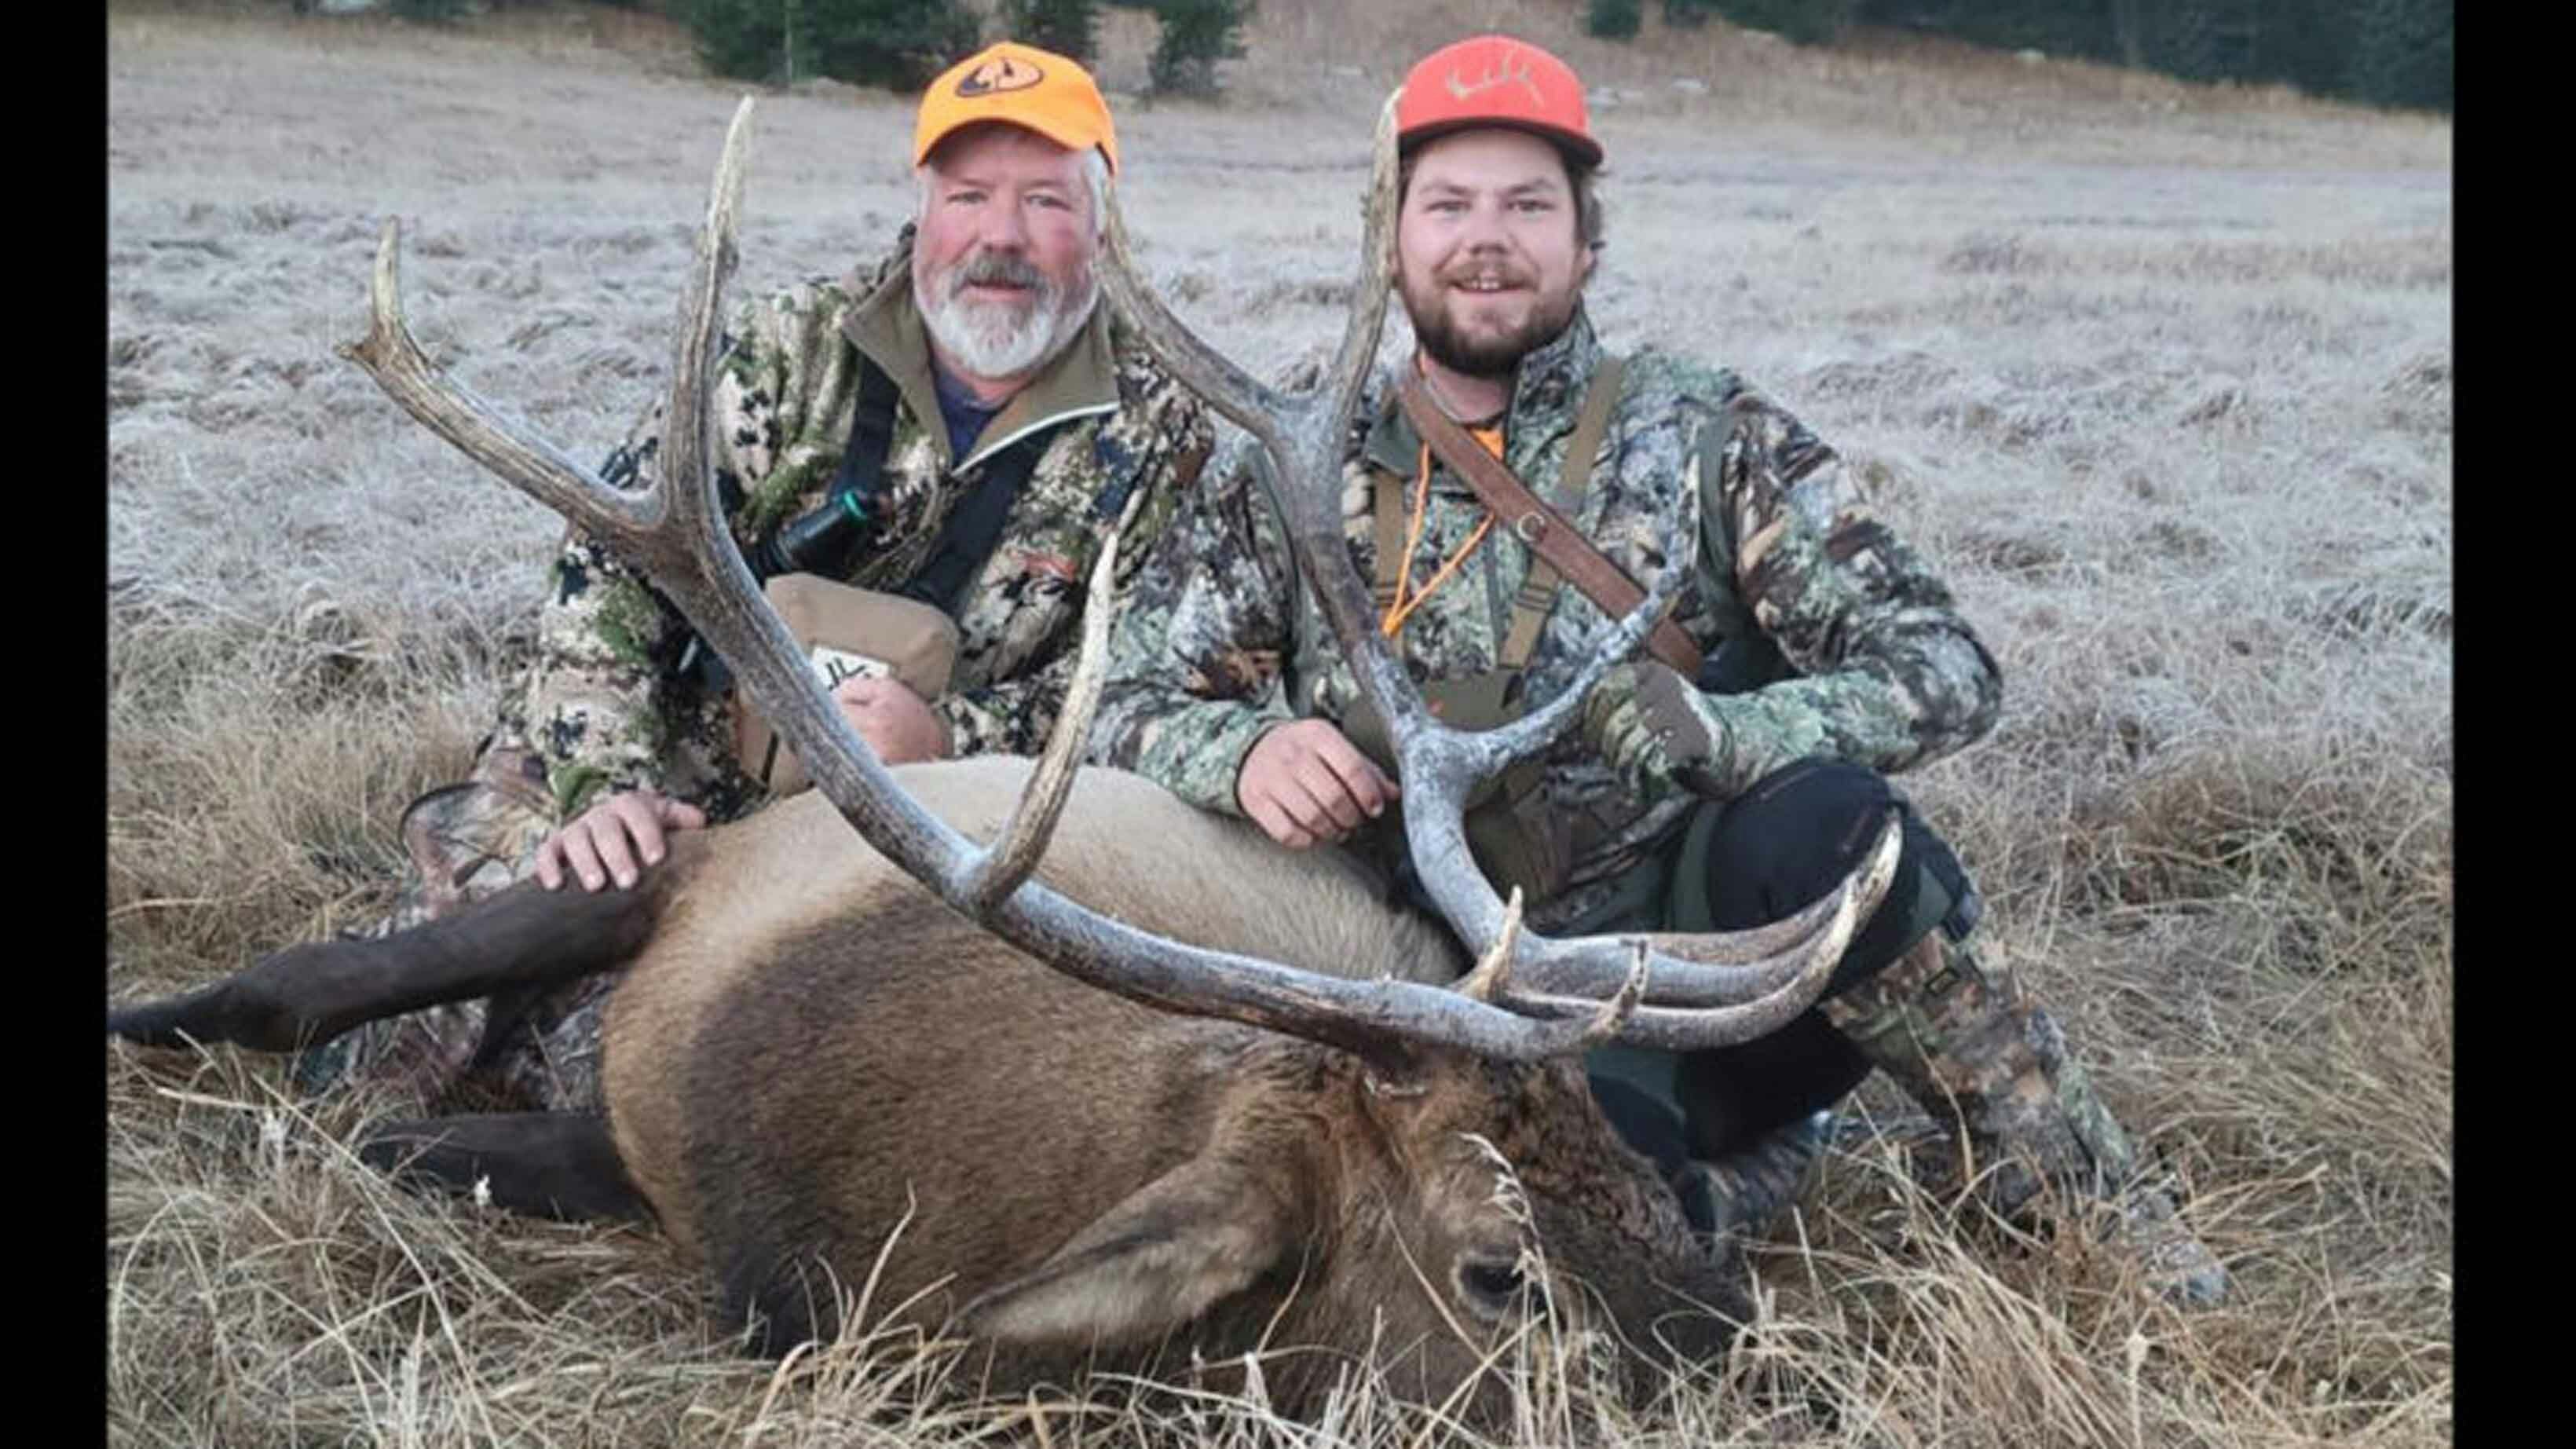 Ed Epperson and his son Dalton, of Cody, pose with Dalton’s first bull elk, which he shot in 2021. The father and son have hunted together ever since Dalton was big enough to tag along.